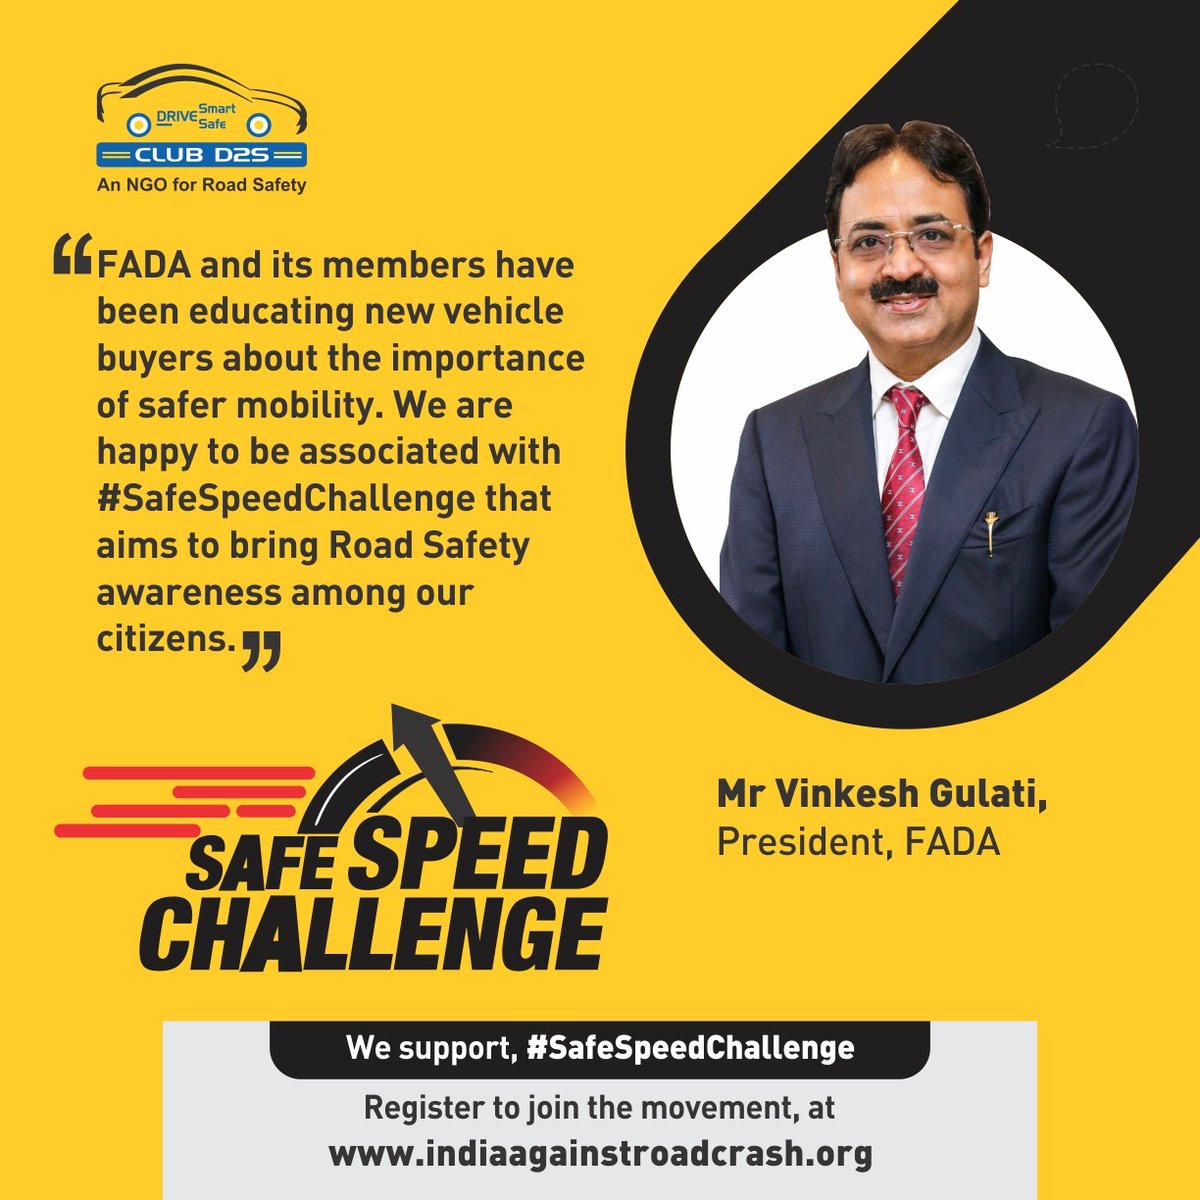 Dealers have been educating importance of safer mobility. Happy to be associated with #SafeSpeedChallenge that aims to bring Road Safety awareness .

I have taken the #RoadSafety pledge. Will You?

TIME FOR YOU to come forward & take the Pledge at indiaagainstroadcrash.org